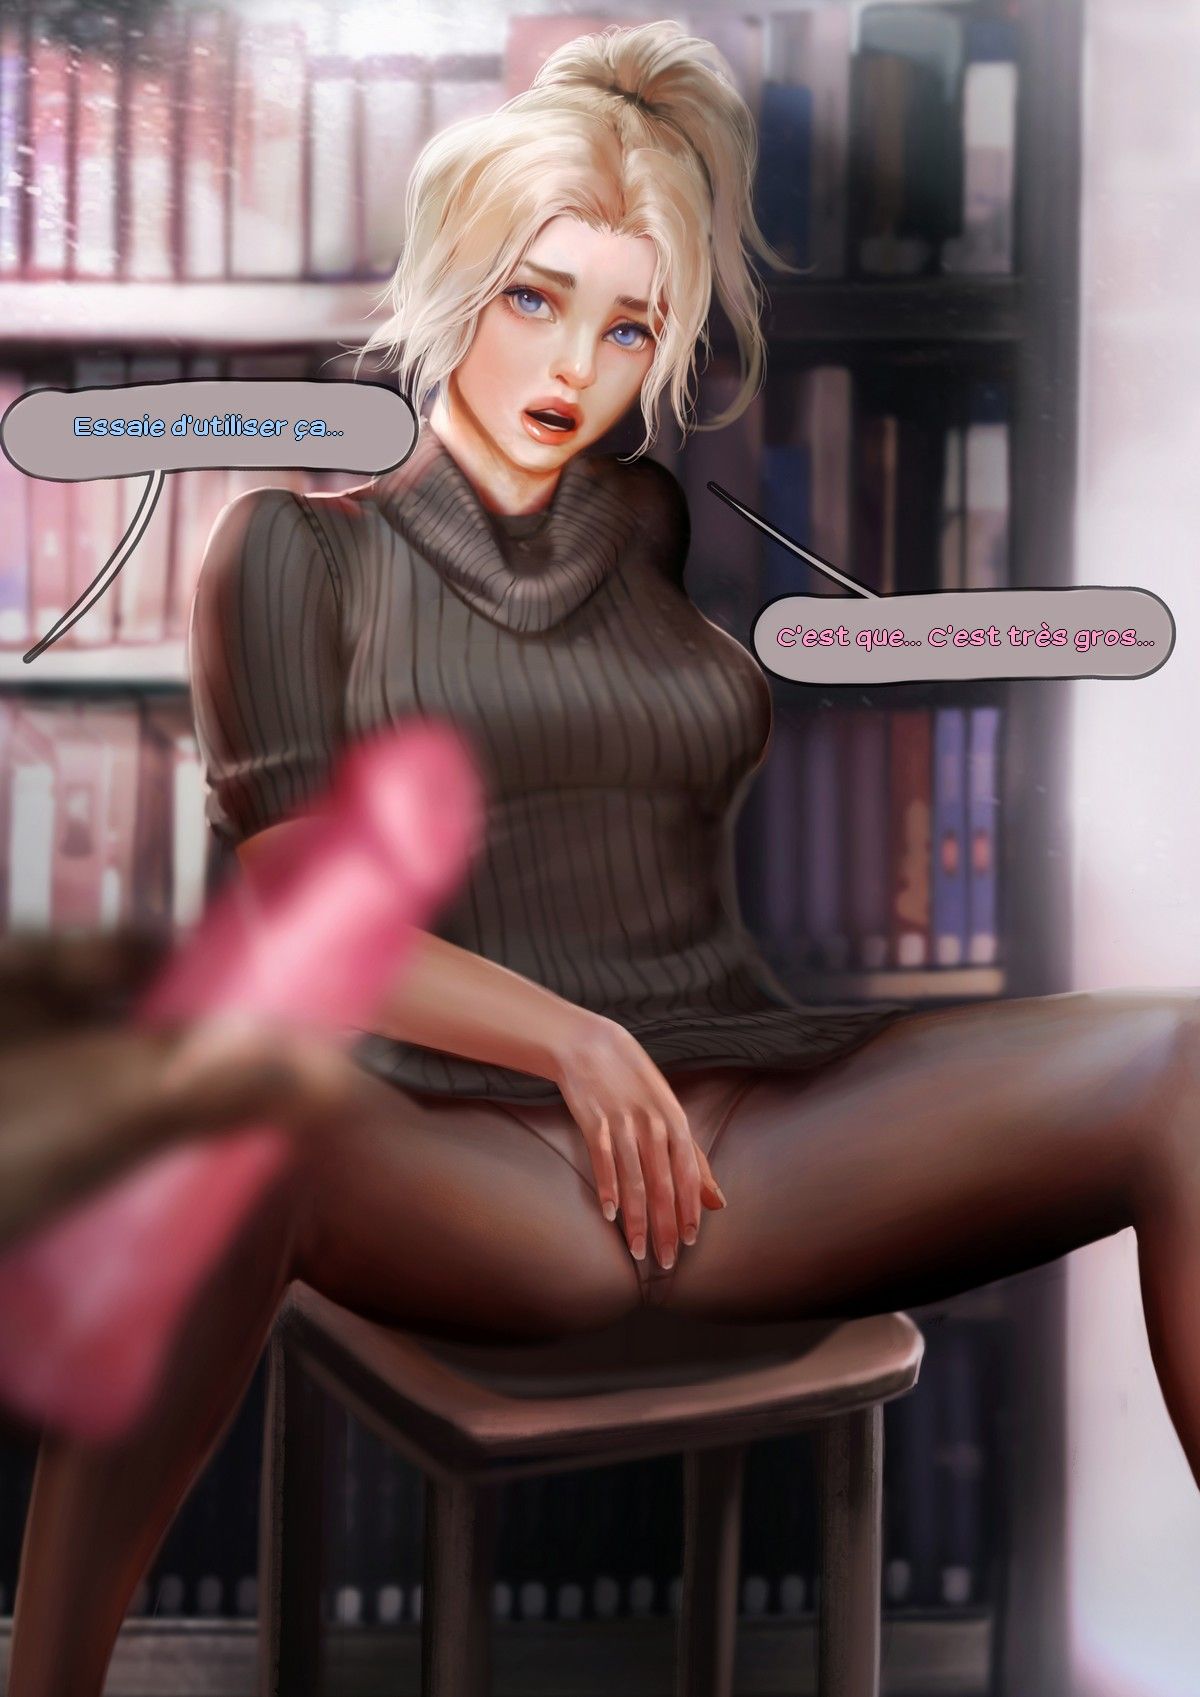 [Firolian] Mercy's second audition [French][Zer0] 19